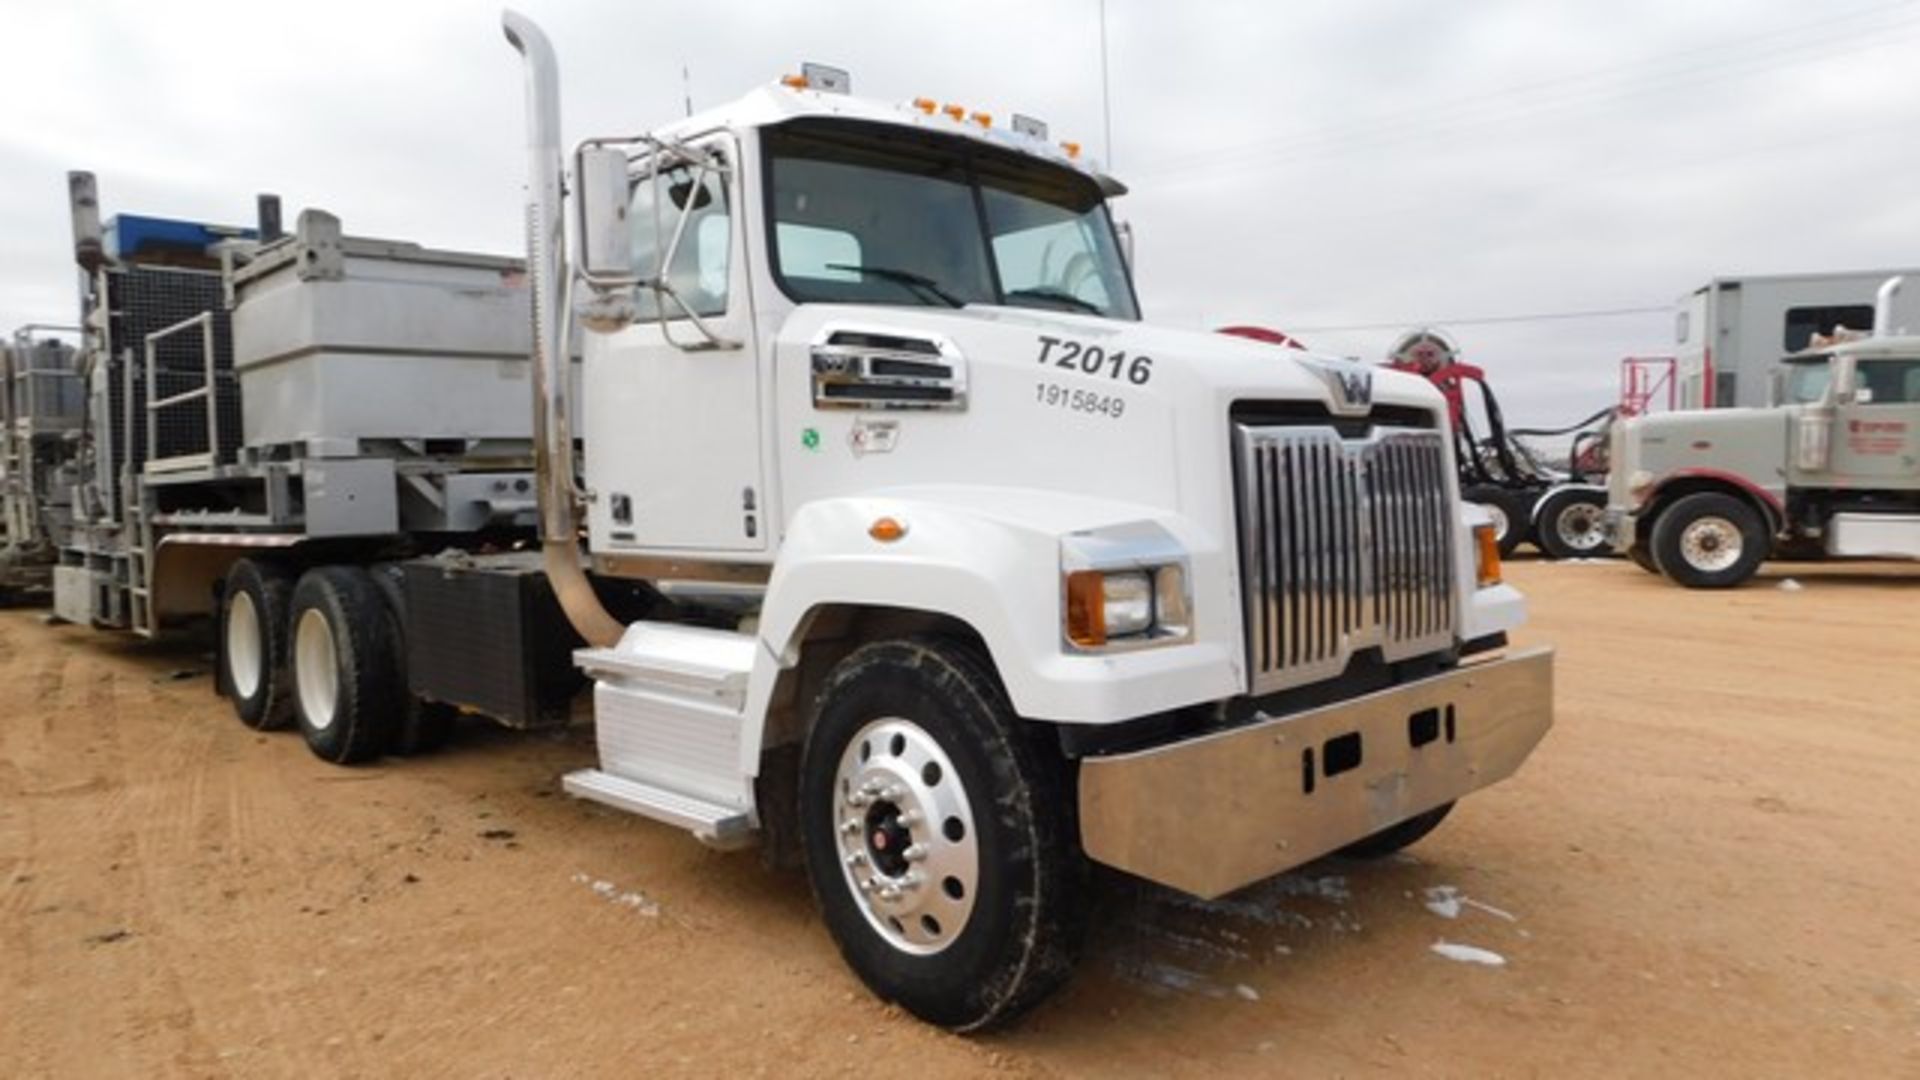 Located in YARD 1 - Midland, TX (1699) (X) 2018 DAIMLER WESTERN STAR T/A DAY CAB - Image 2 of 8